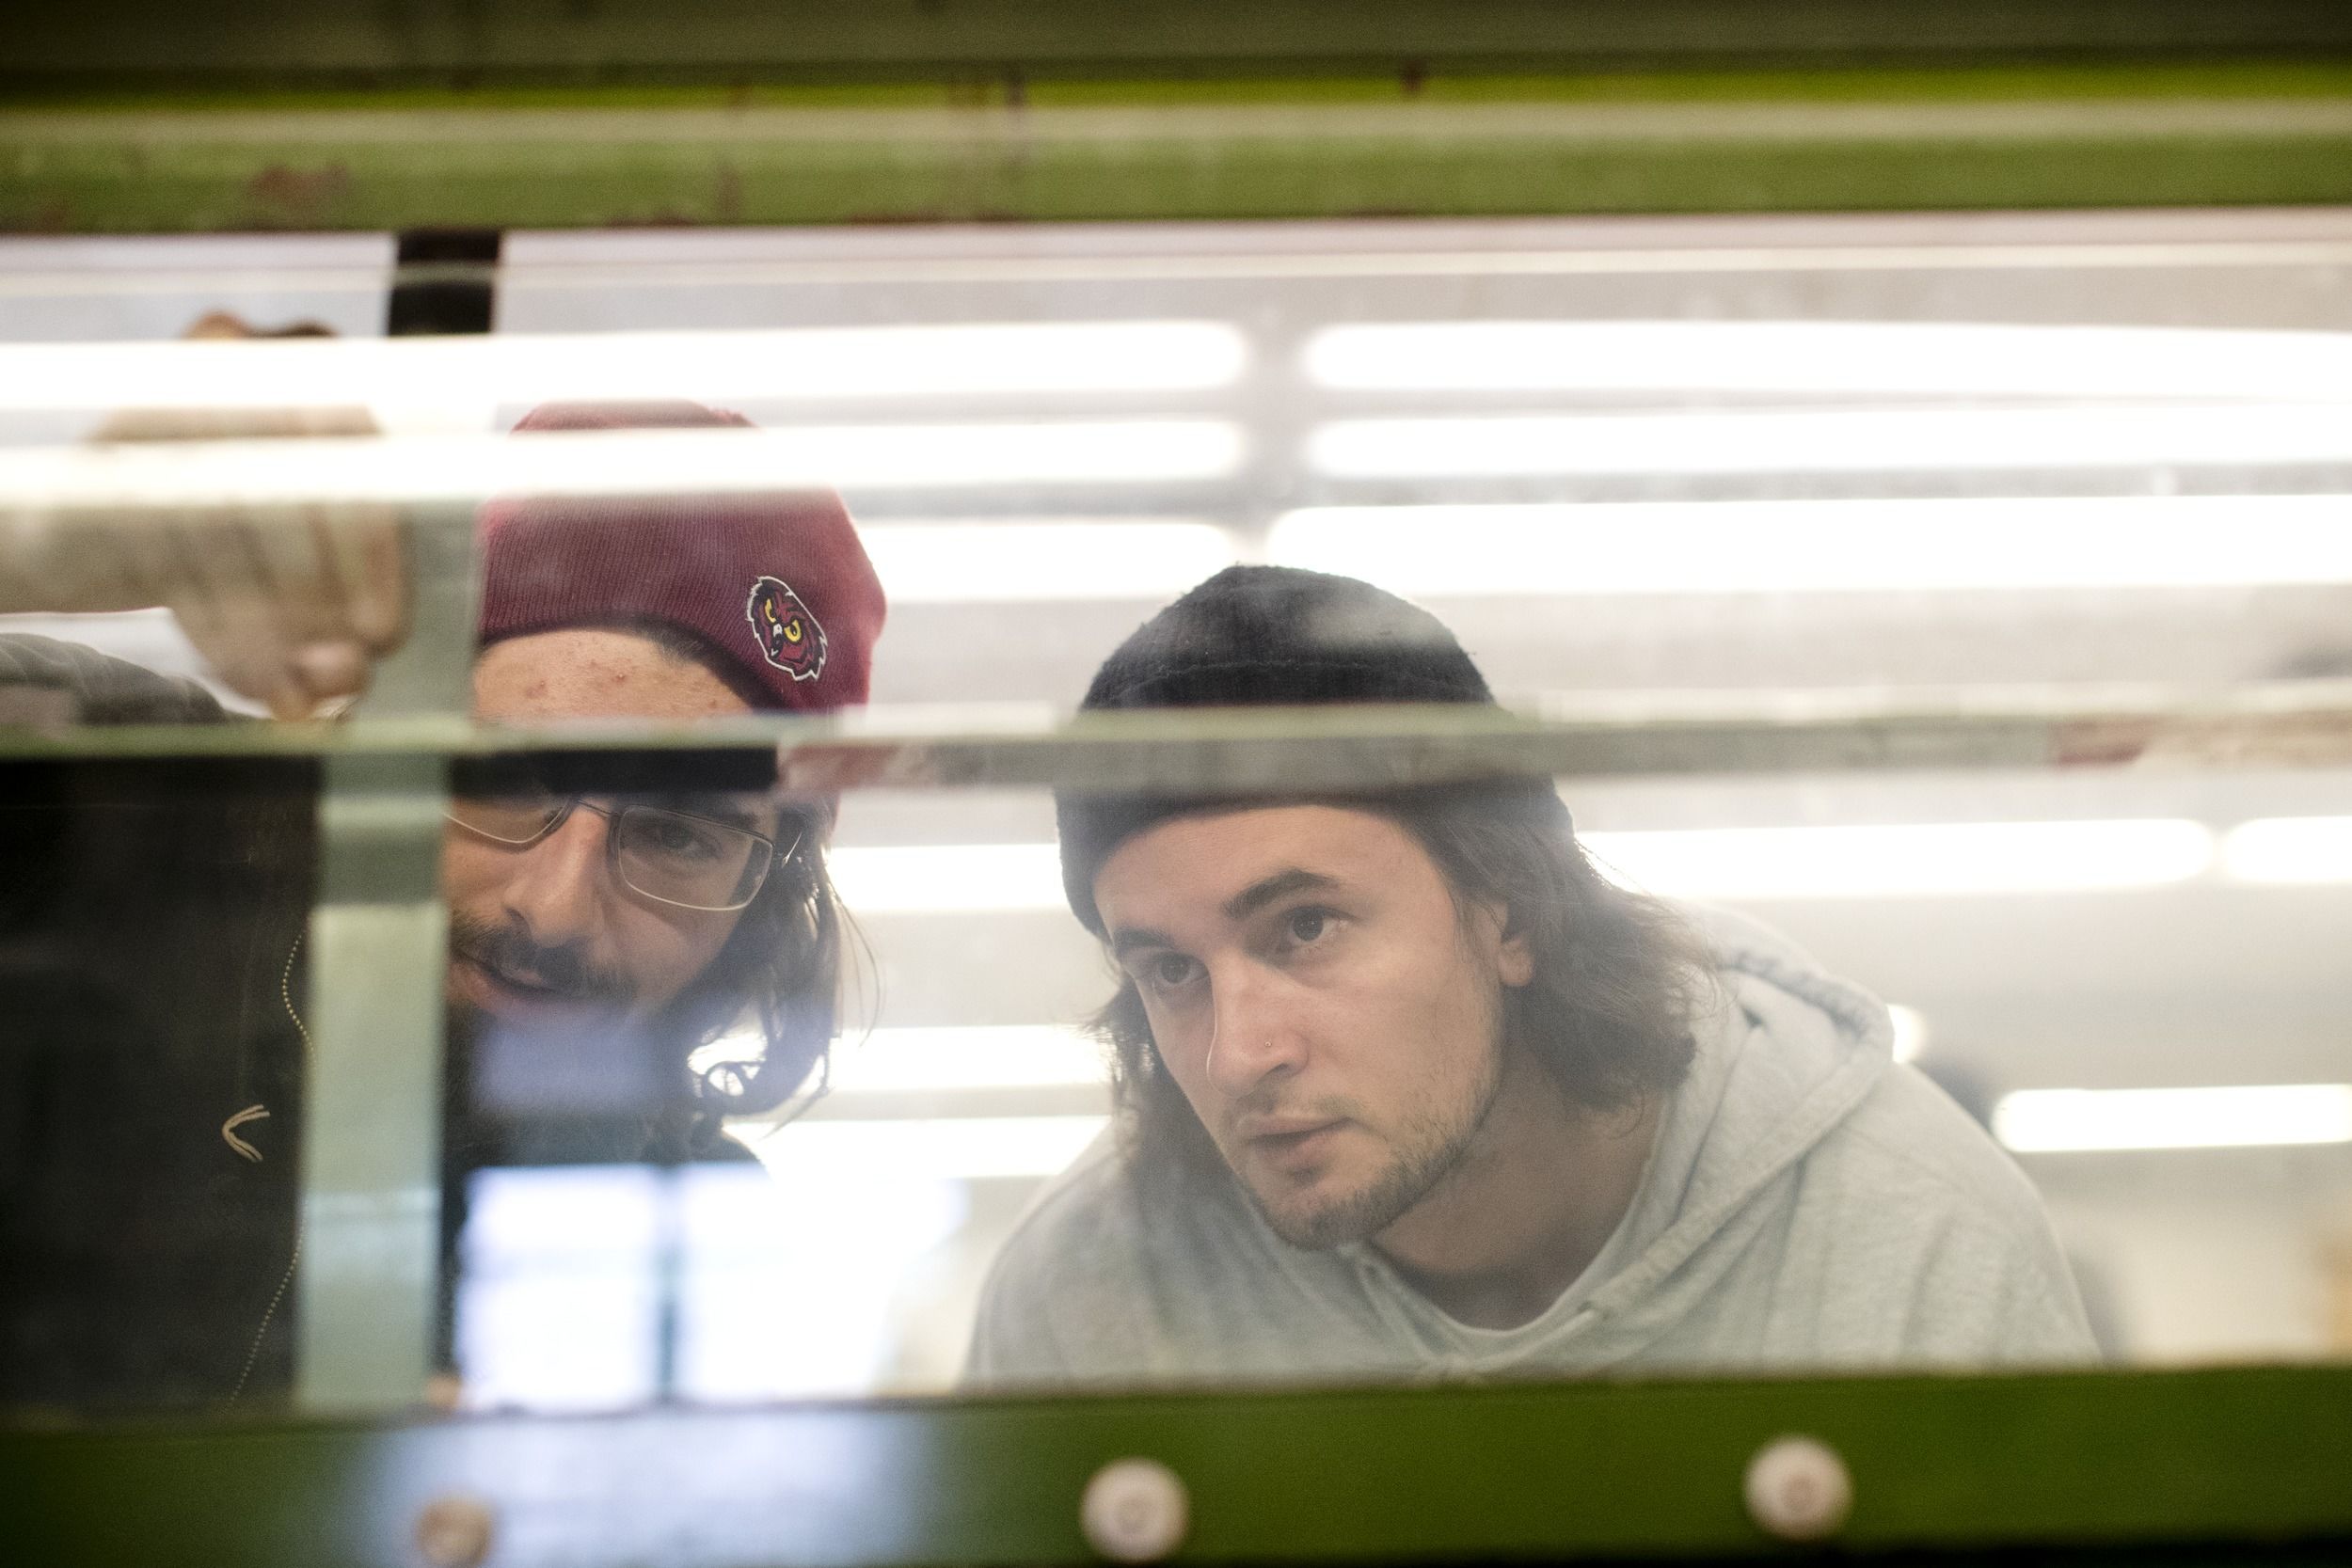 Two engineering students are looking at something through a glass panel.